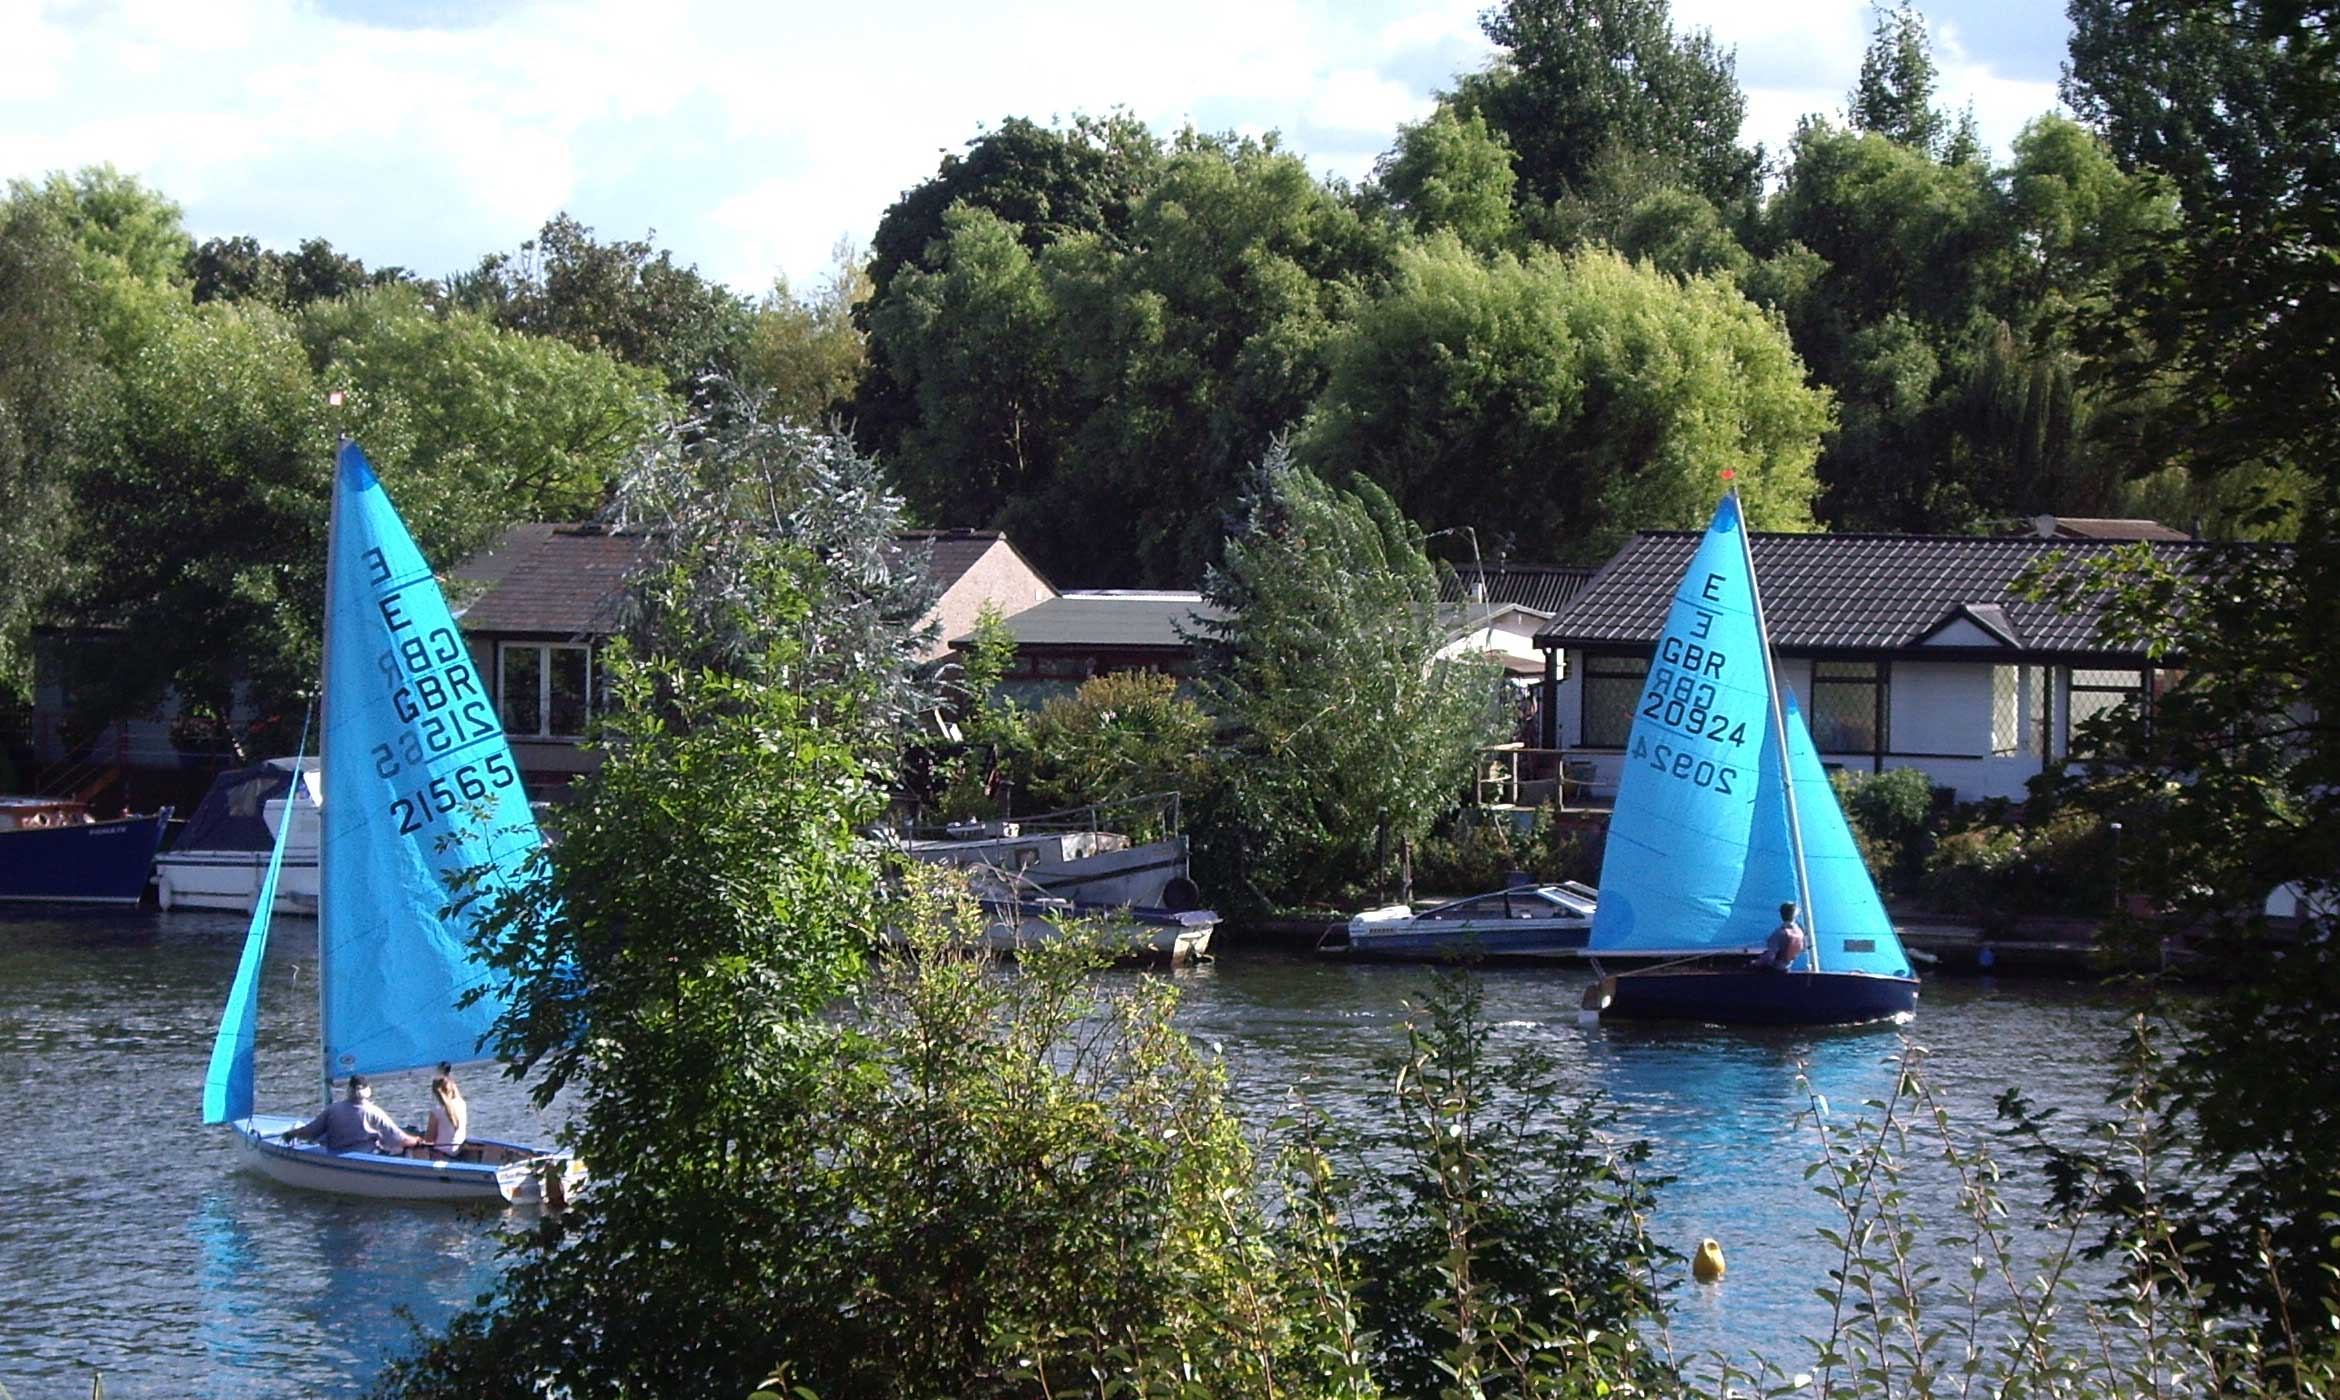 Sailing boats on the Thames